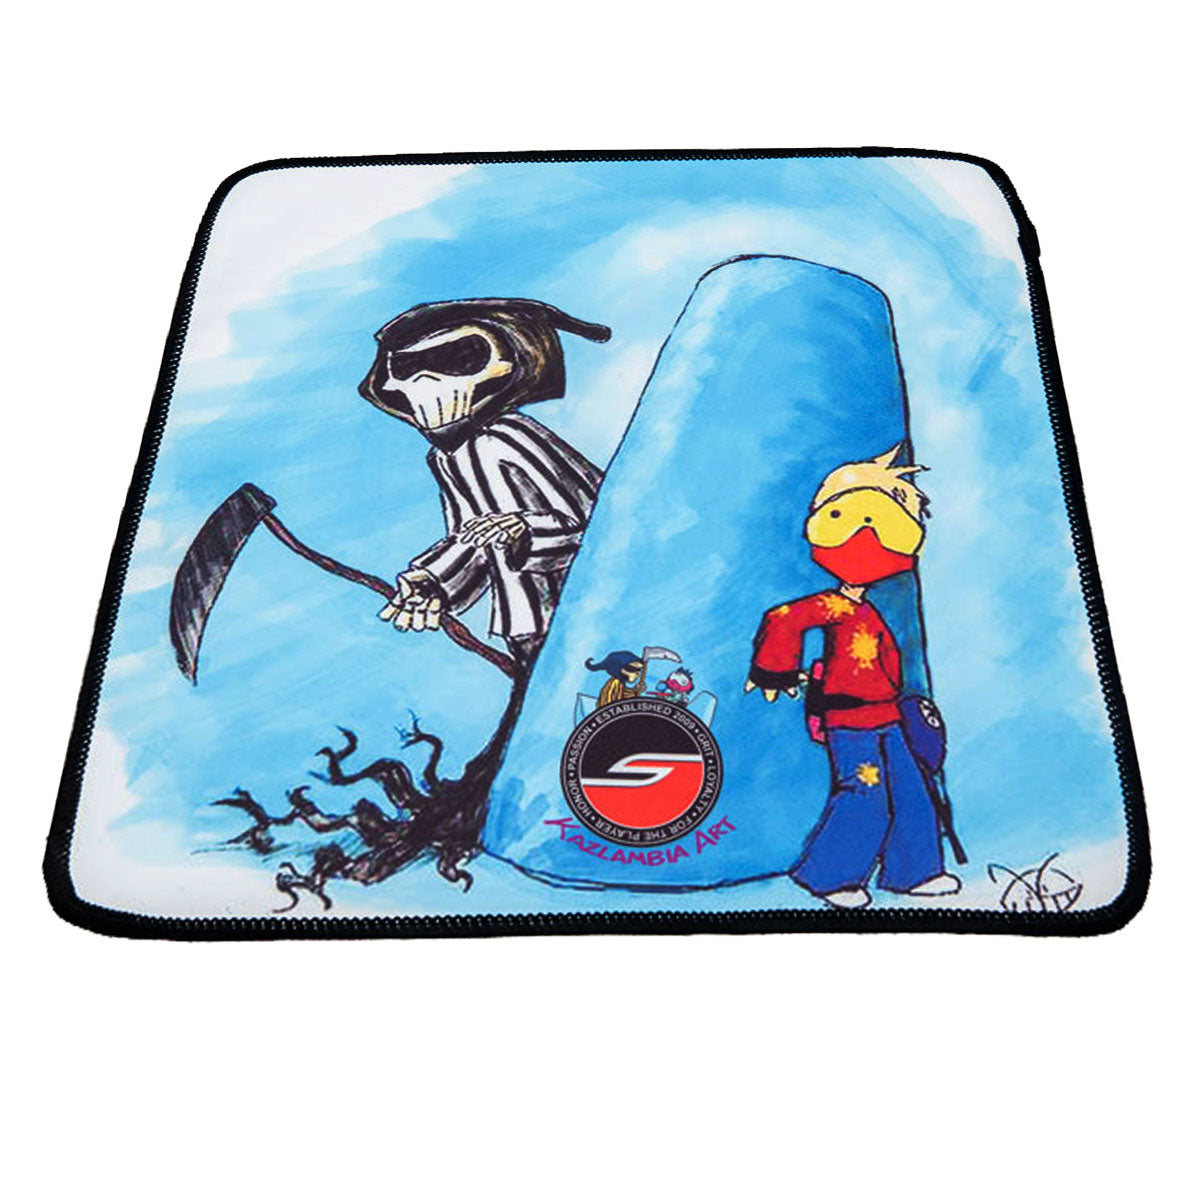 Microfiber Cleaning Cloth, Reaper, Paintball Cartoon Series | Paintball Cleaning Microfiber | Social Paintball